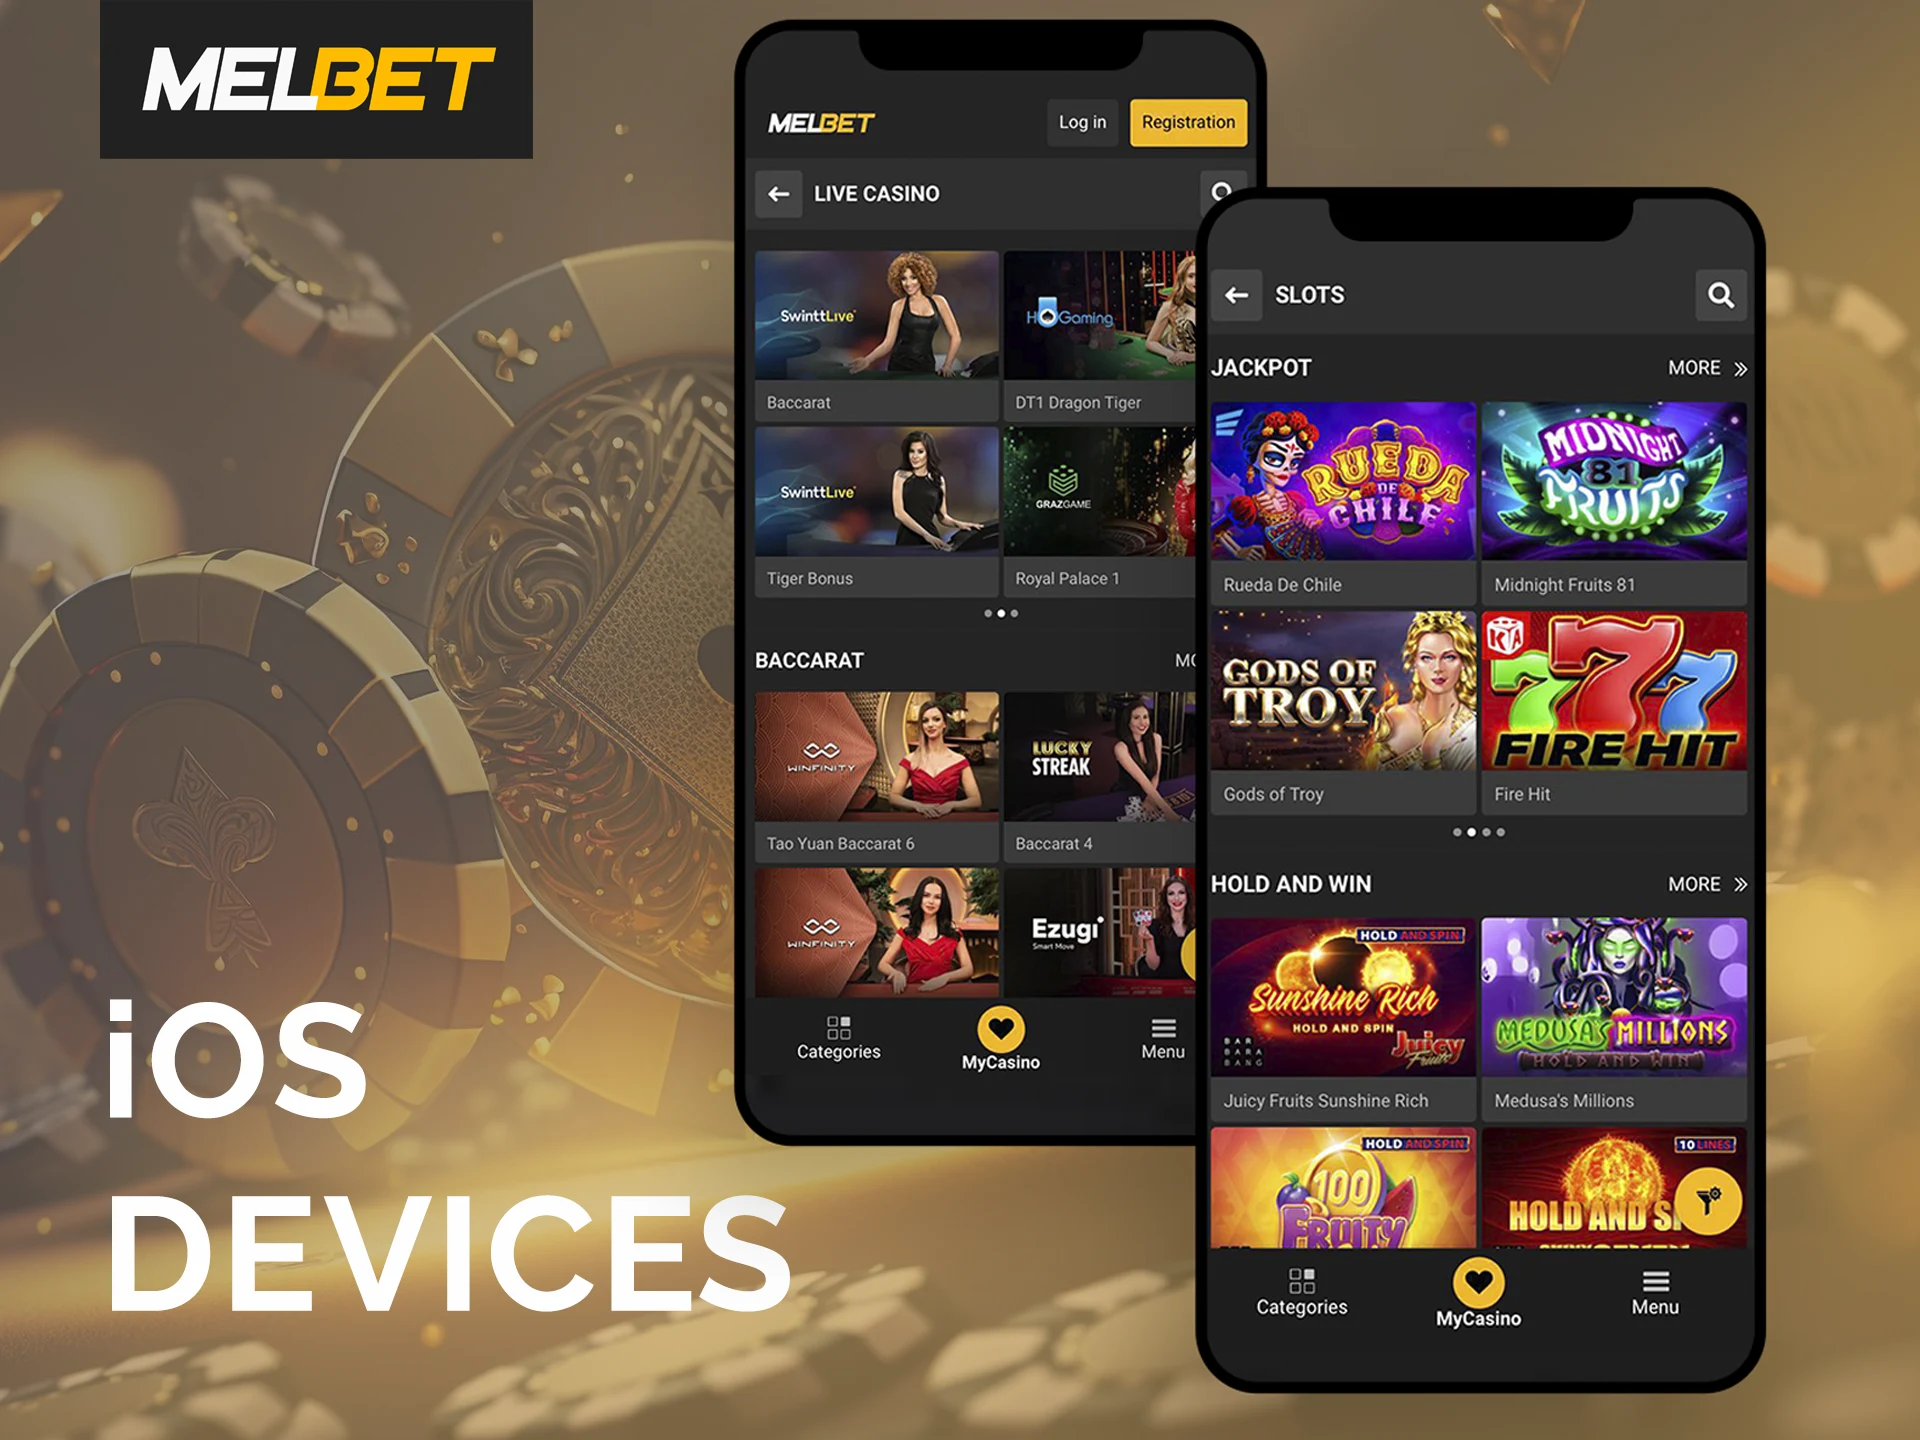 Download the Melbet app on your iOS device.